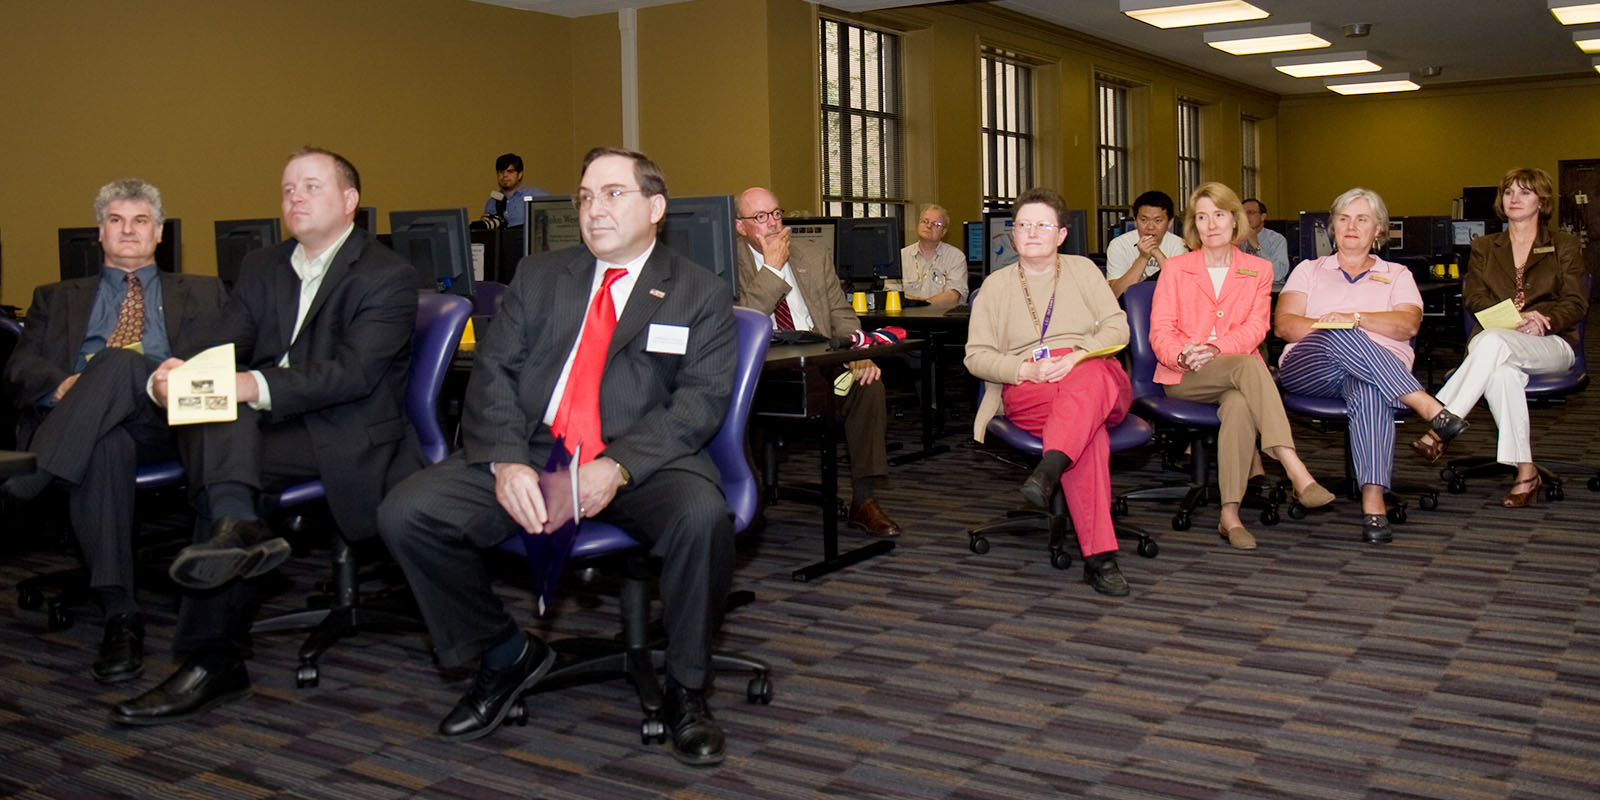 Audience, including Department Chair Lawrence Smolinsky, Dean Guillermo Ferreyra, and Chancellor Michael Martin